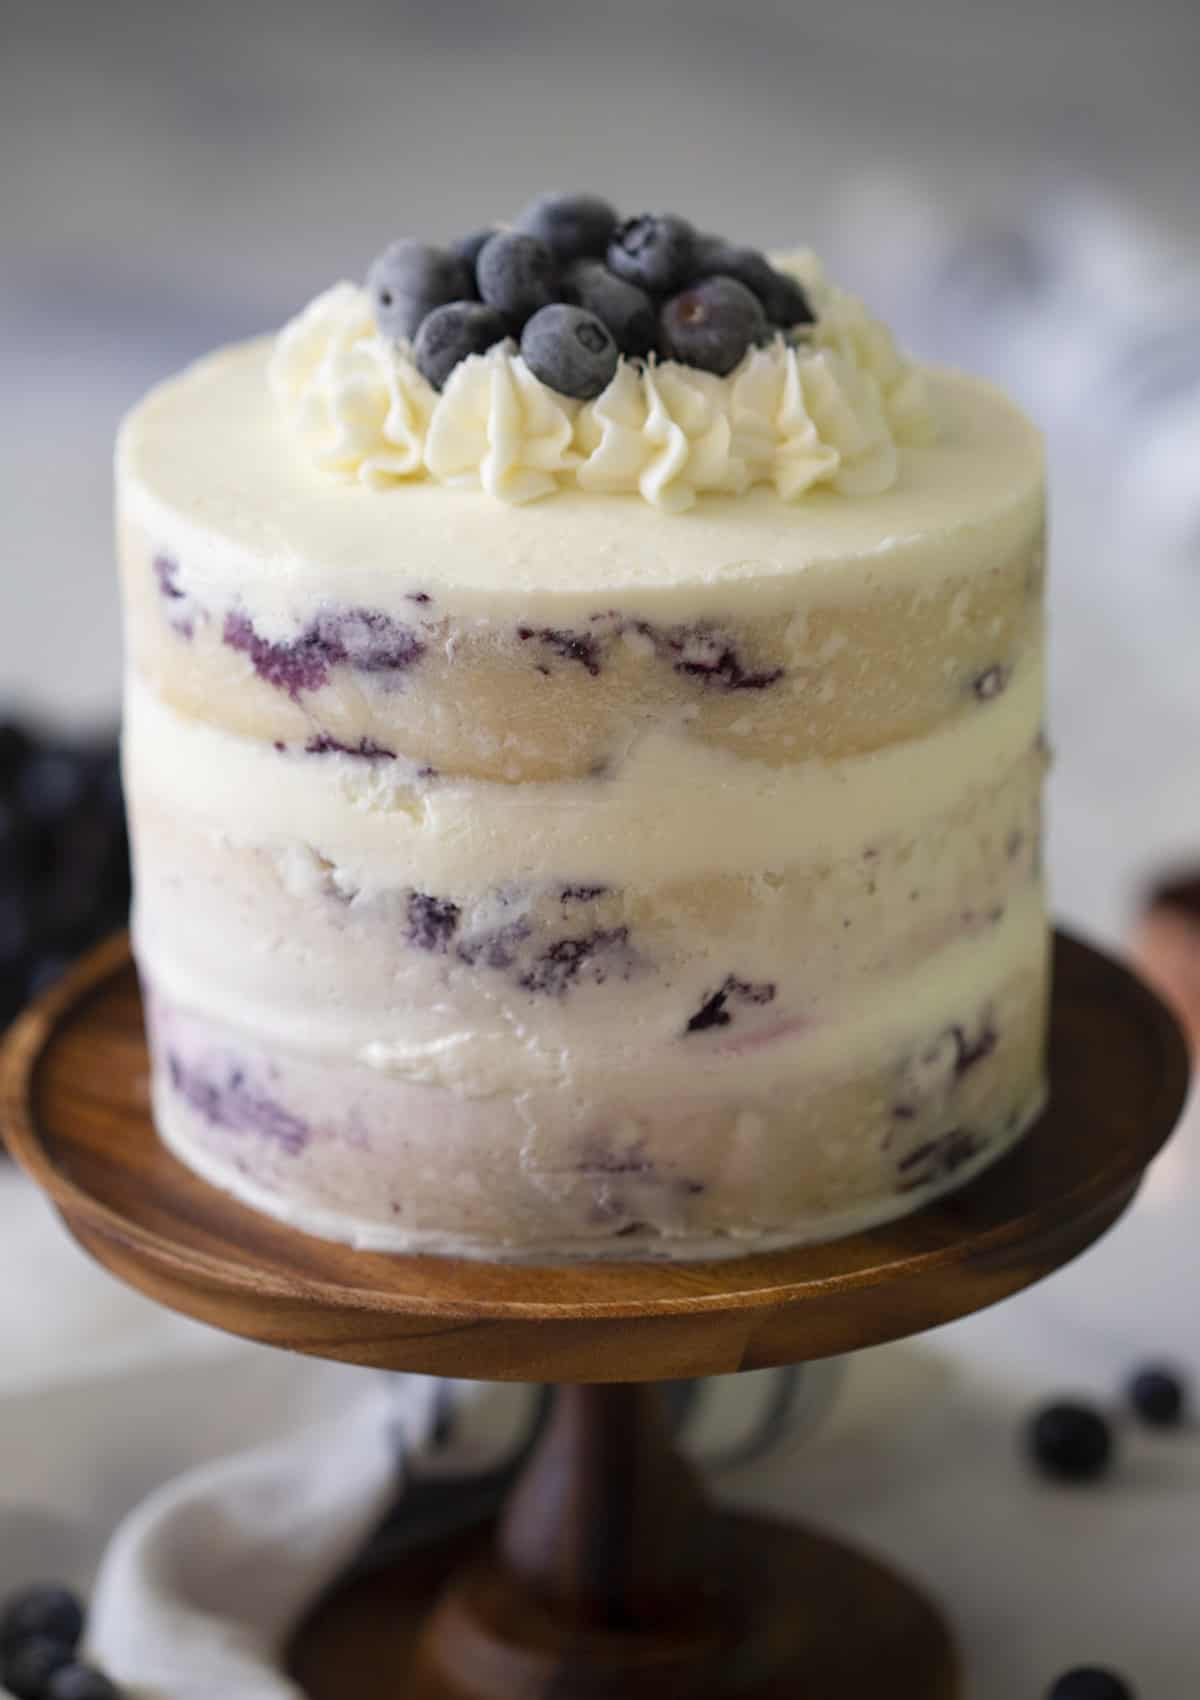 A lemon blueberry cake on a wooden cake stand